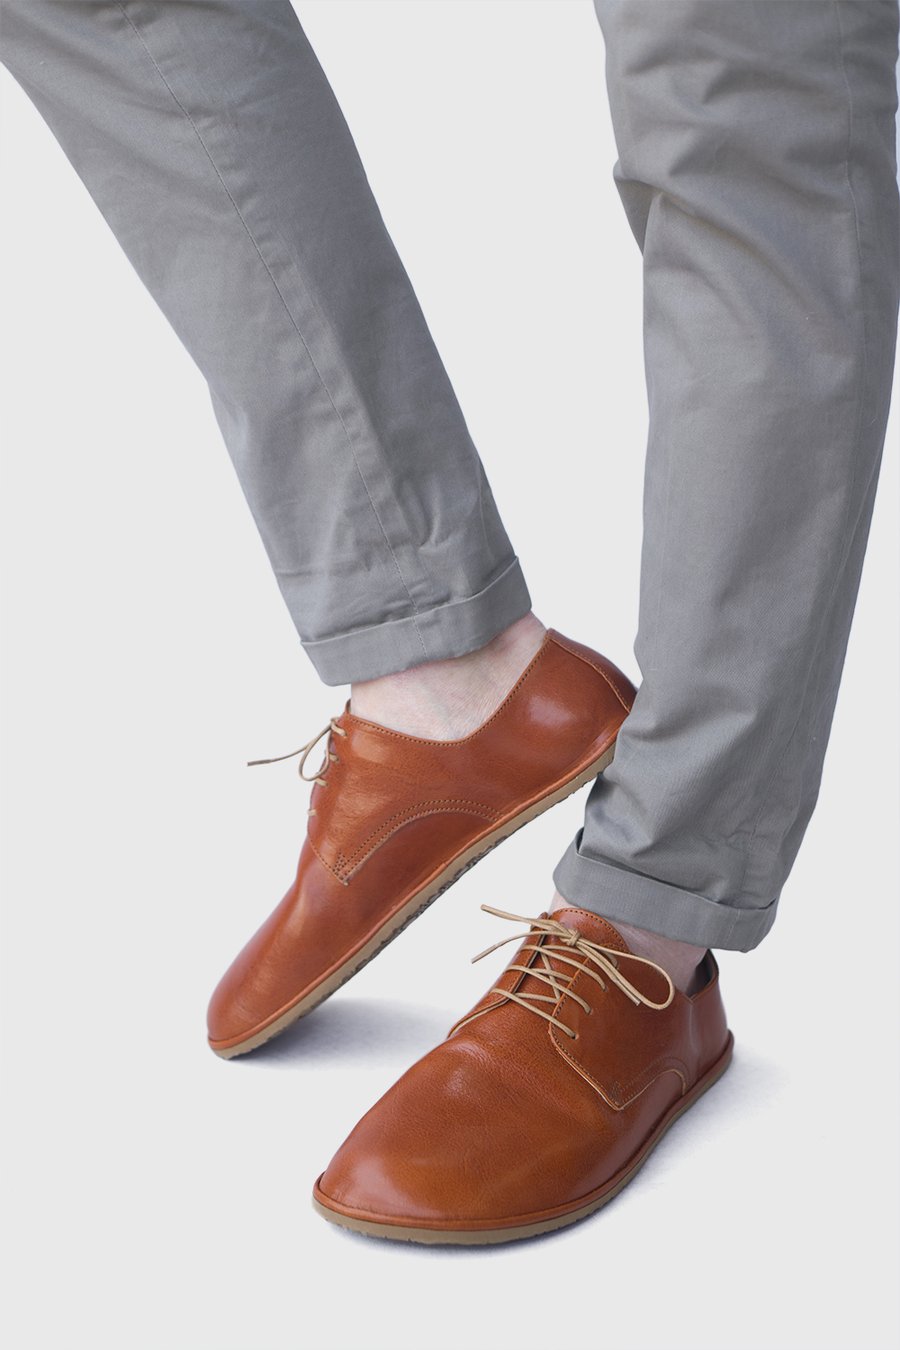 Image of Plain Toe Derby in Veg-tanned Lustrous Tobacco